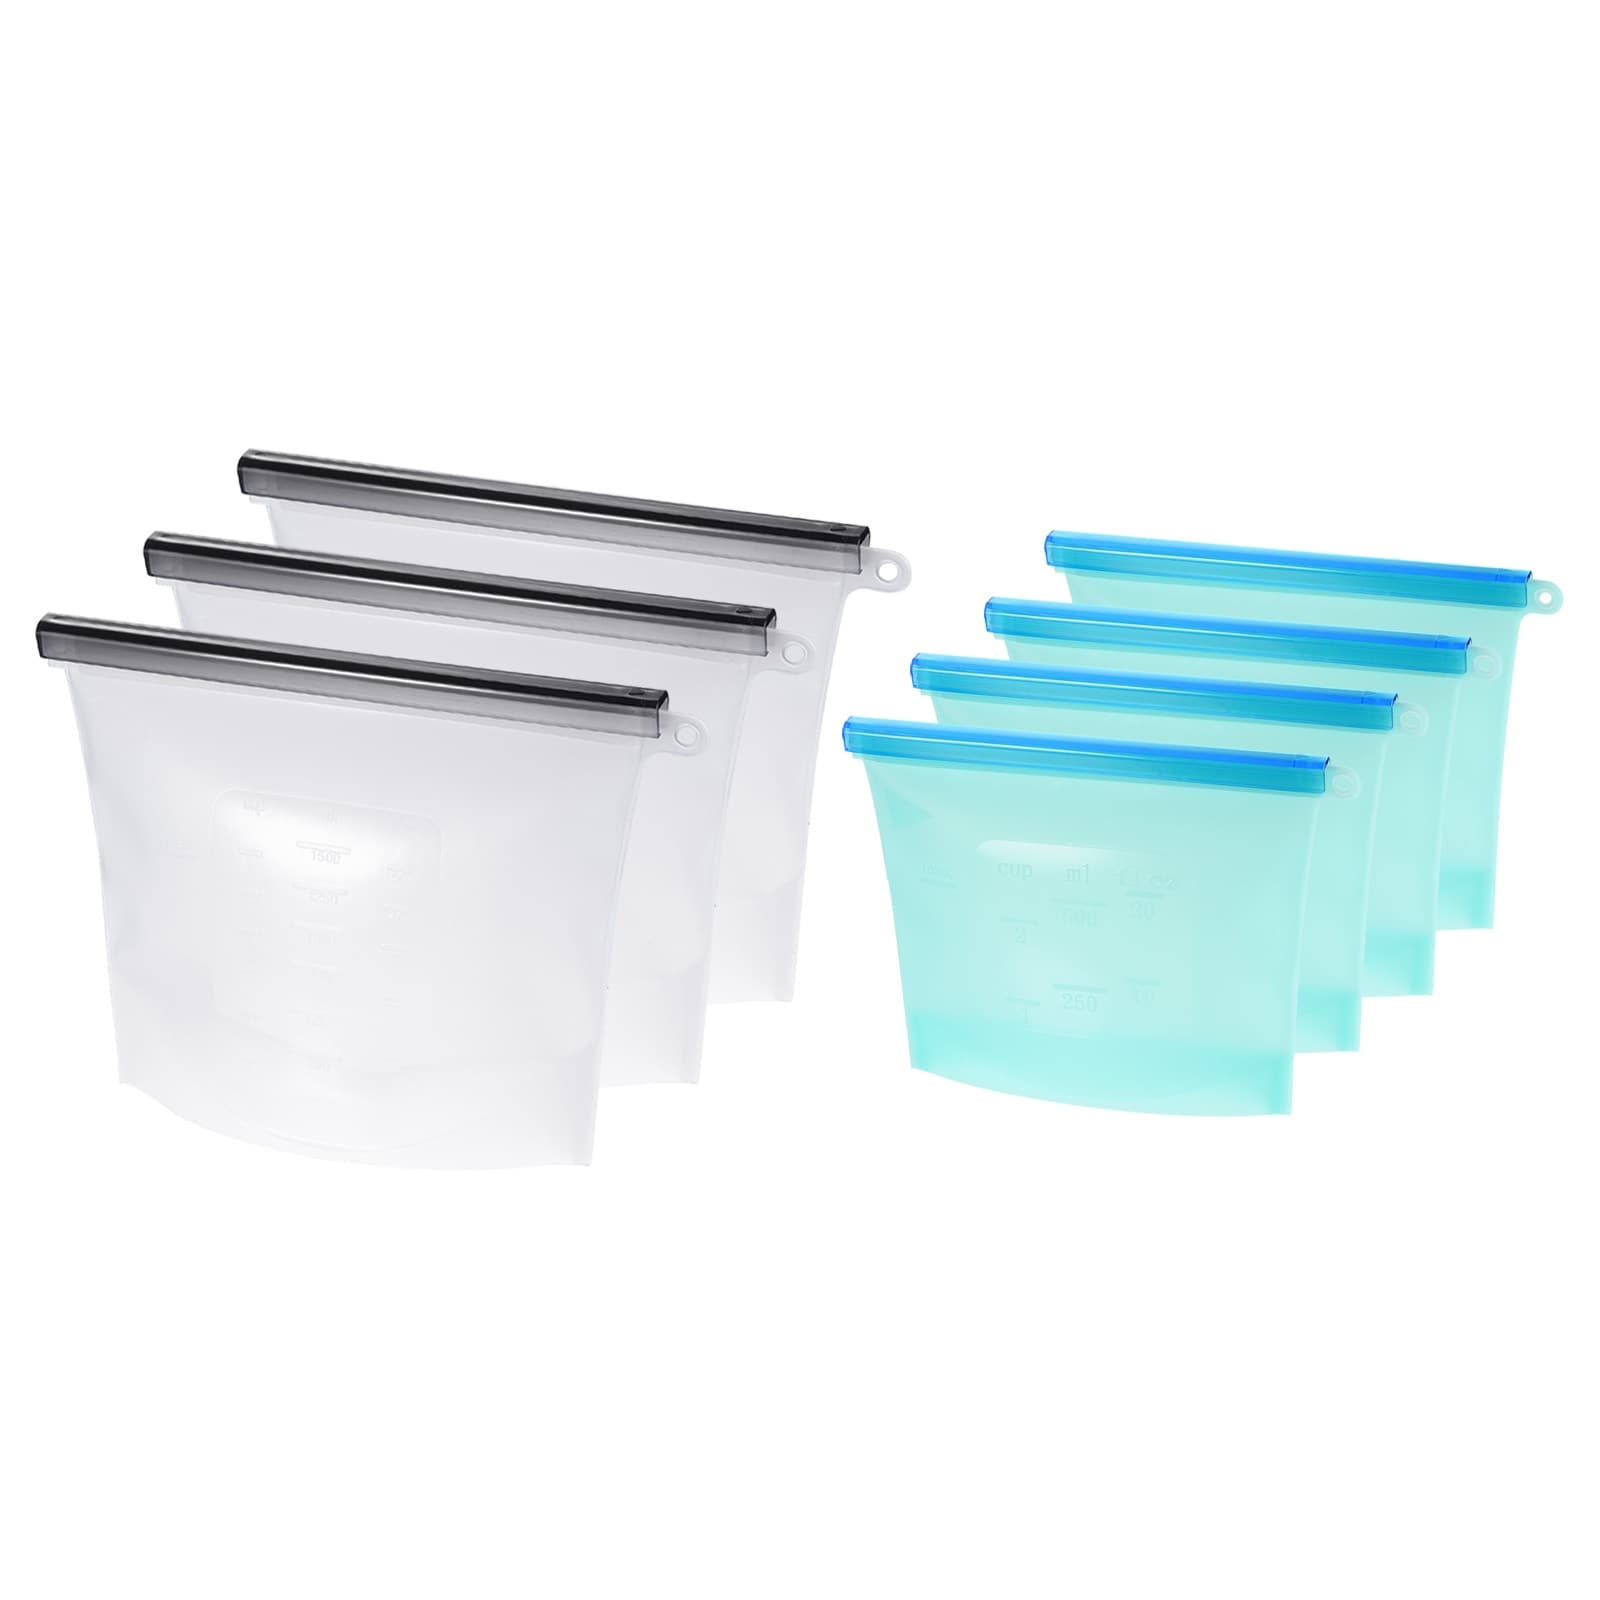 Reusable Silicone Food Storage Bags Leakproof Freezer Bag-White+Blue(5Pcs) - White+Blue